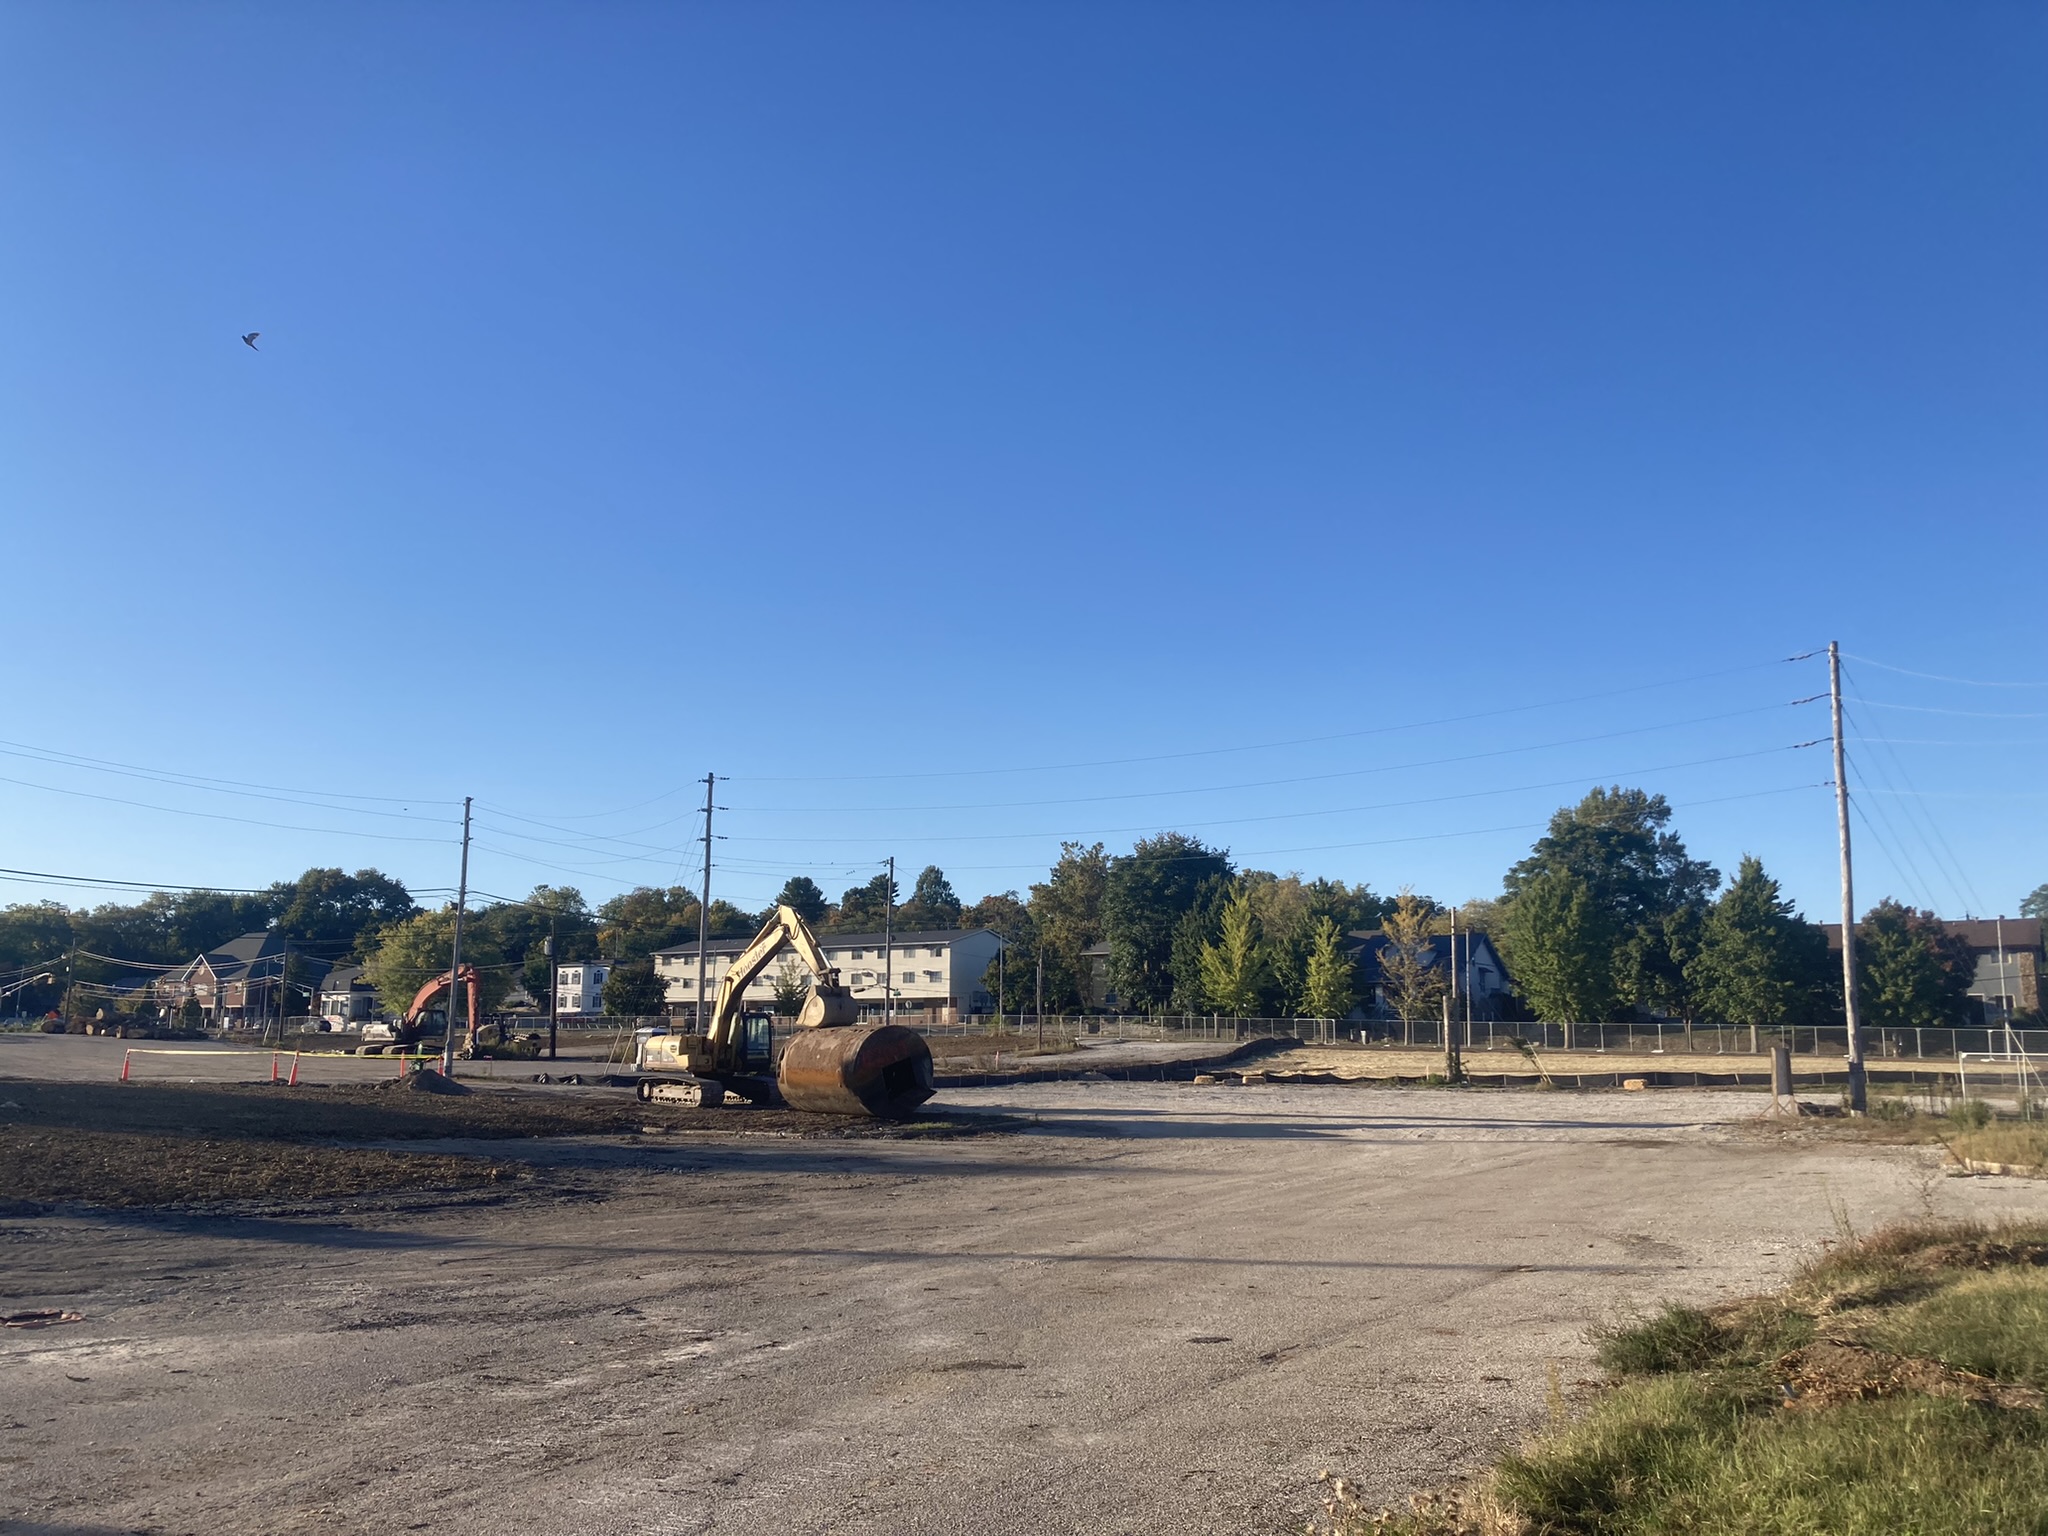 An excavator is in a cleared and fenced construction area;  its bucket rests on a cylindrical tank.  In the background, telephone poles and wires, trees and residential buildings (or small offices). 